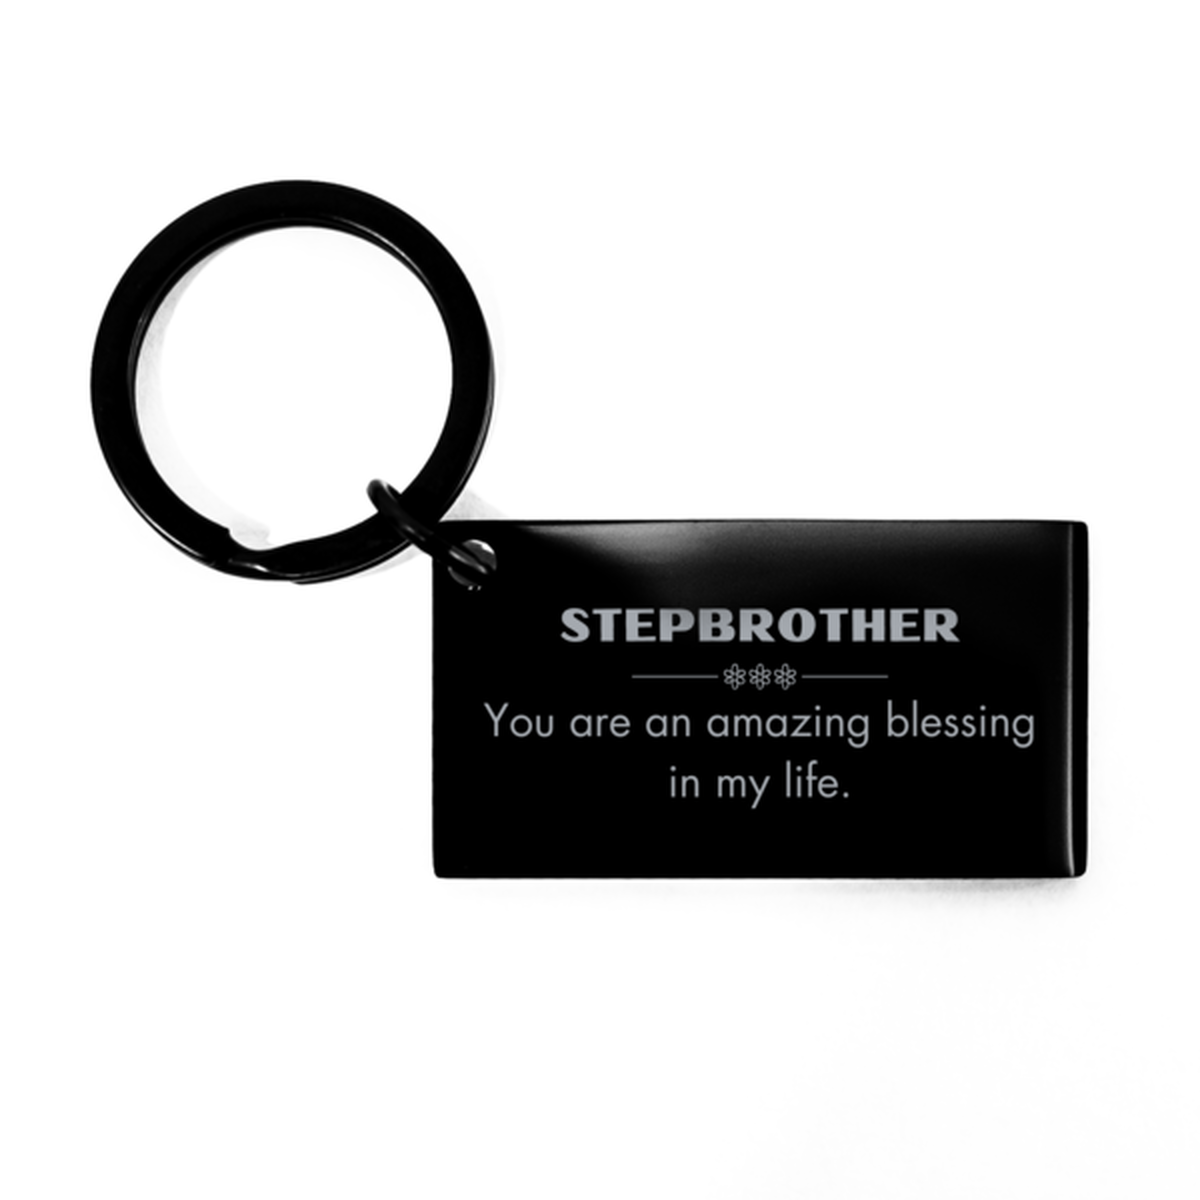 Stepbrother Keychain, You are an amazing blessing in my life, Thank You Gifts For Stepbrother, Inspirational Birthday Christmas Unique Gifts For Stepbrother